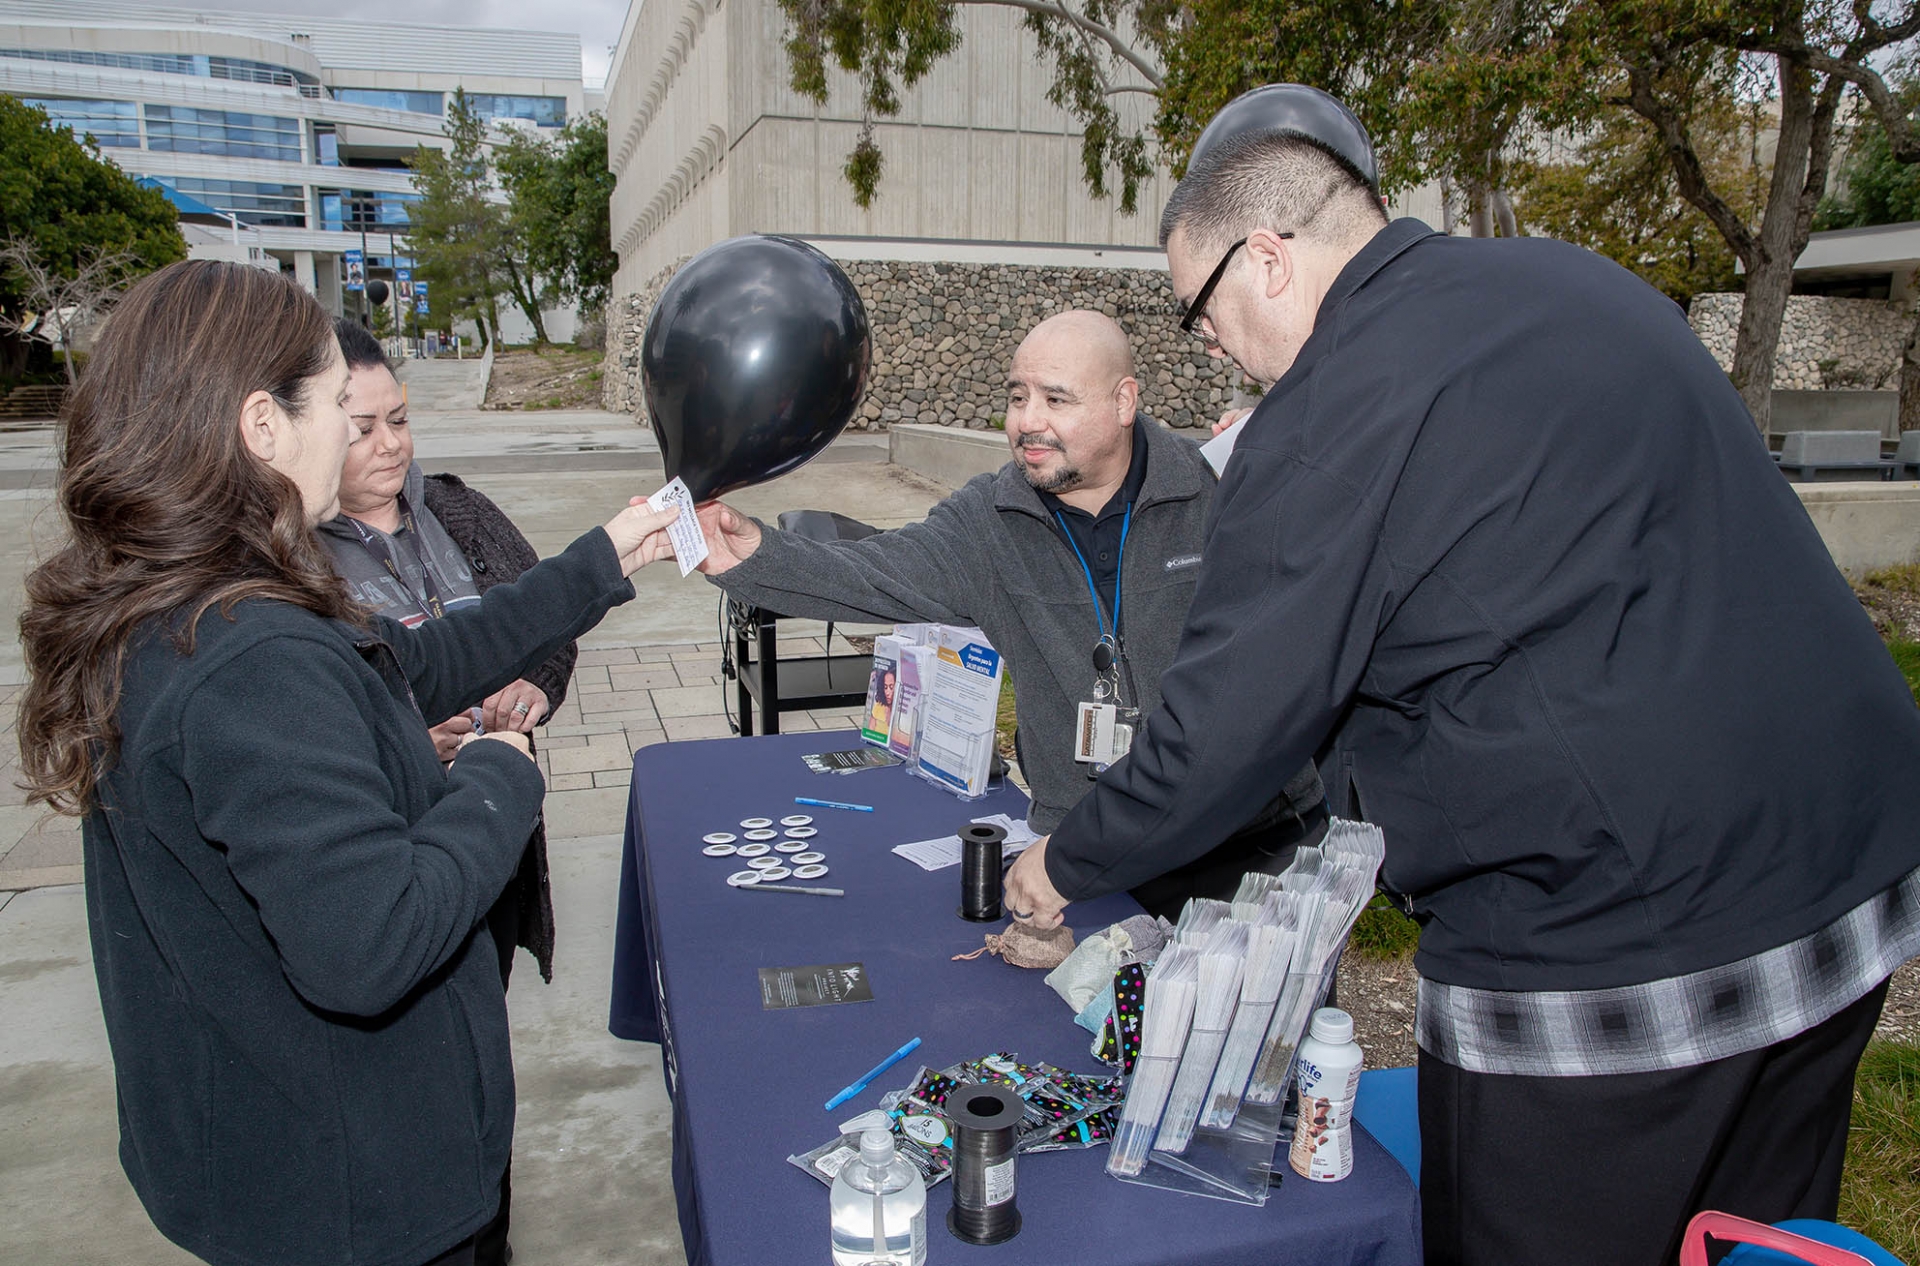 San Bernardino County Social Services staff members Alex Cordova (second from right) and Enrique Gonzalez met with the Coyote community on March 6 on Coyote Walk during Black Balloon Day, aimed bring awareness to the dangers of drug overdoses and substance use disorder.